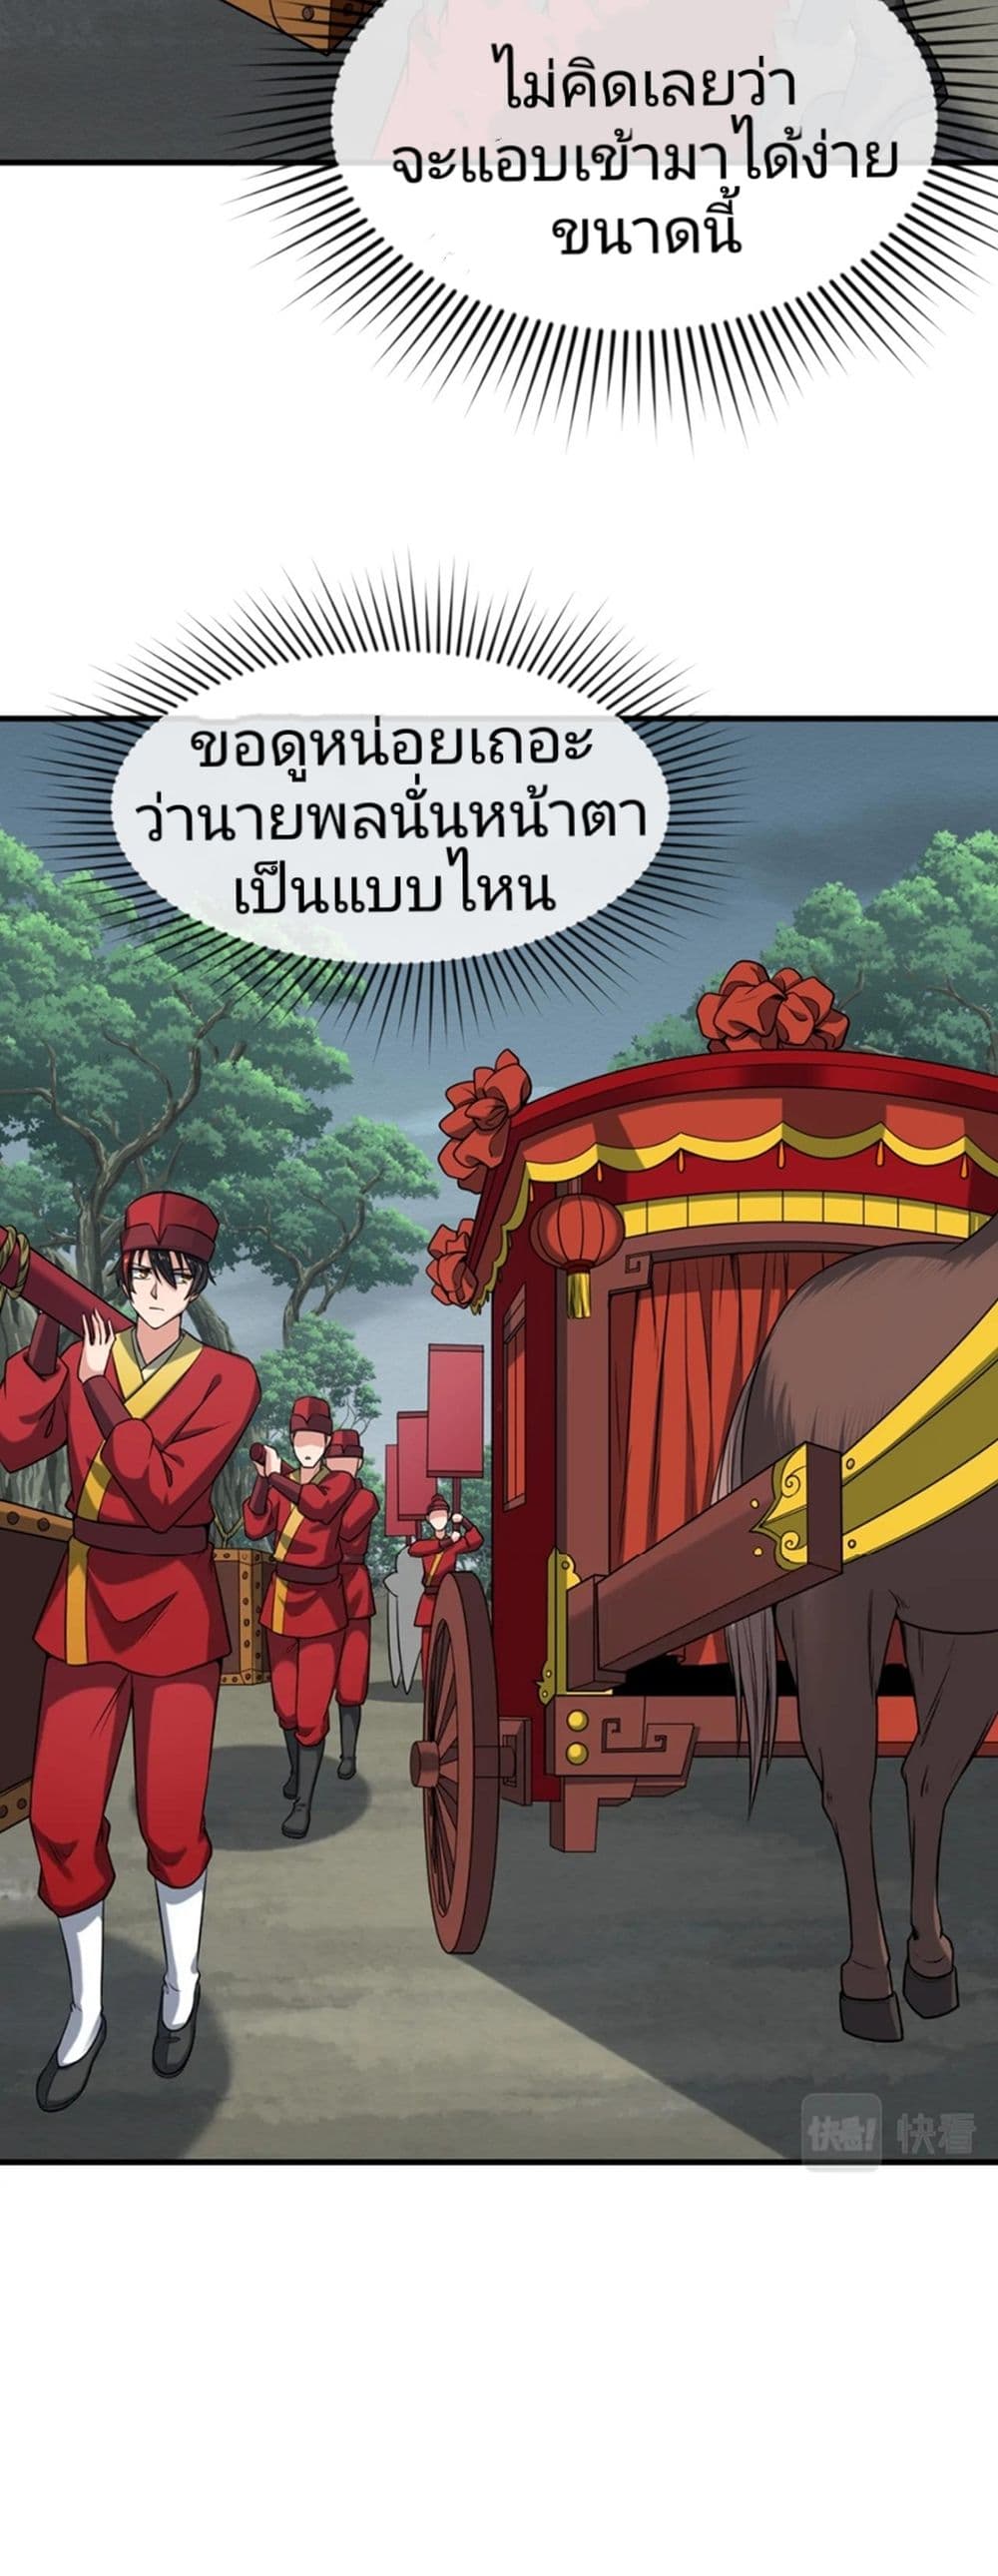 The Age of Ghost Spirits à¸à¸­à¸à¸à¸µà¹ 14 (41)